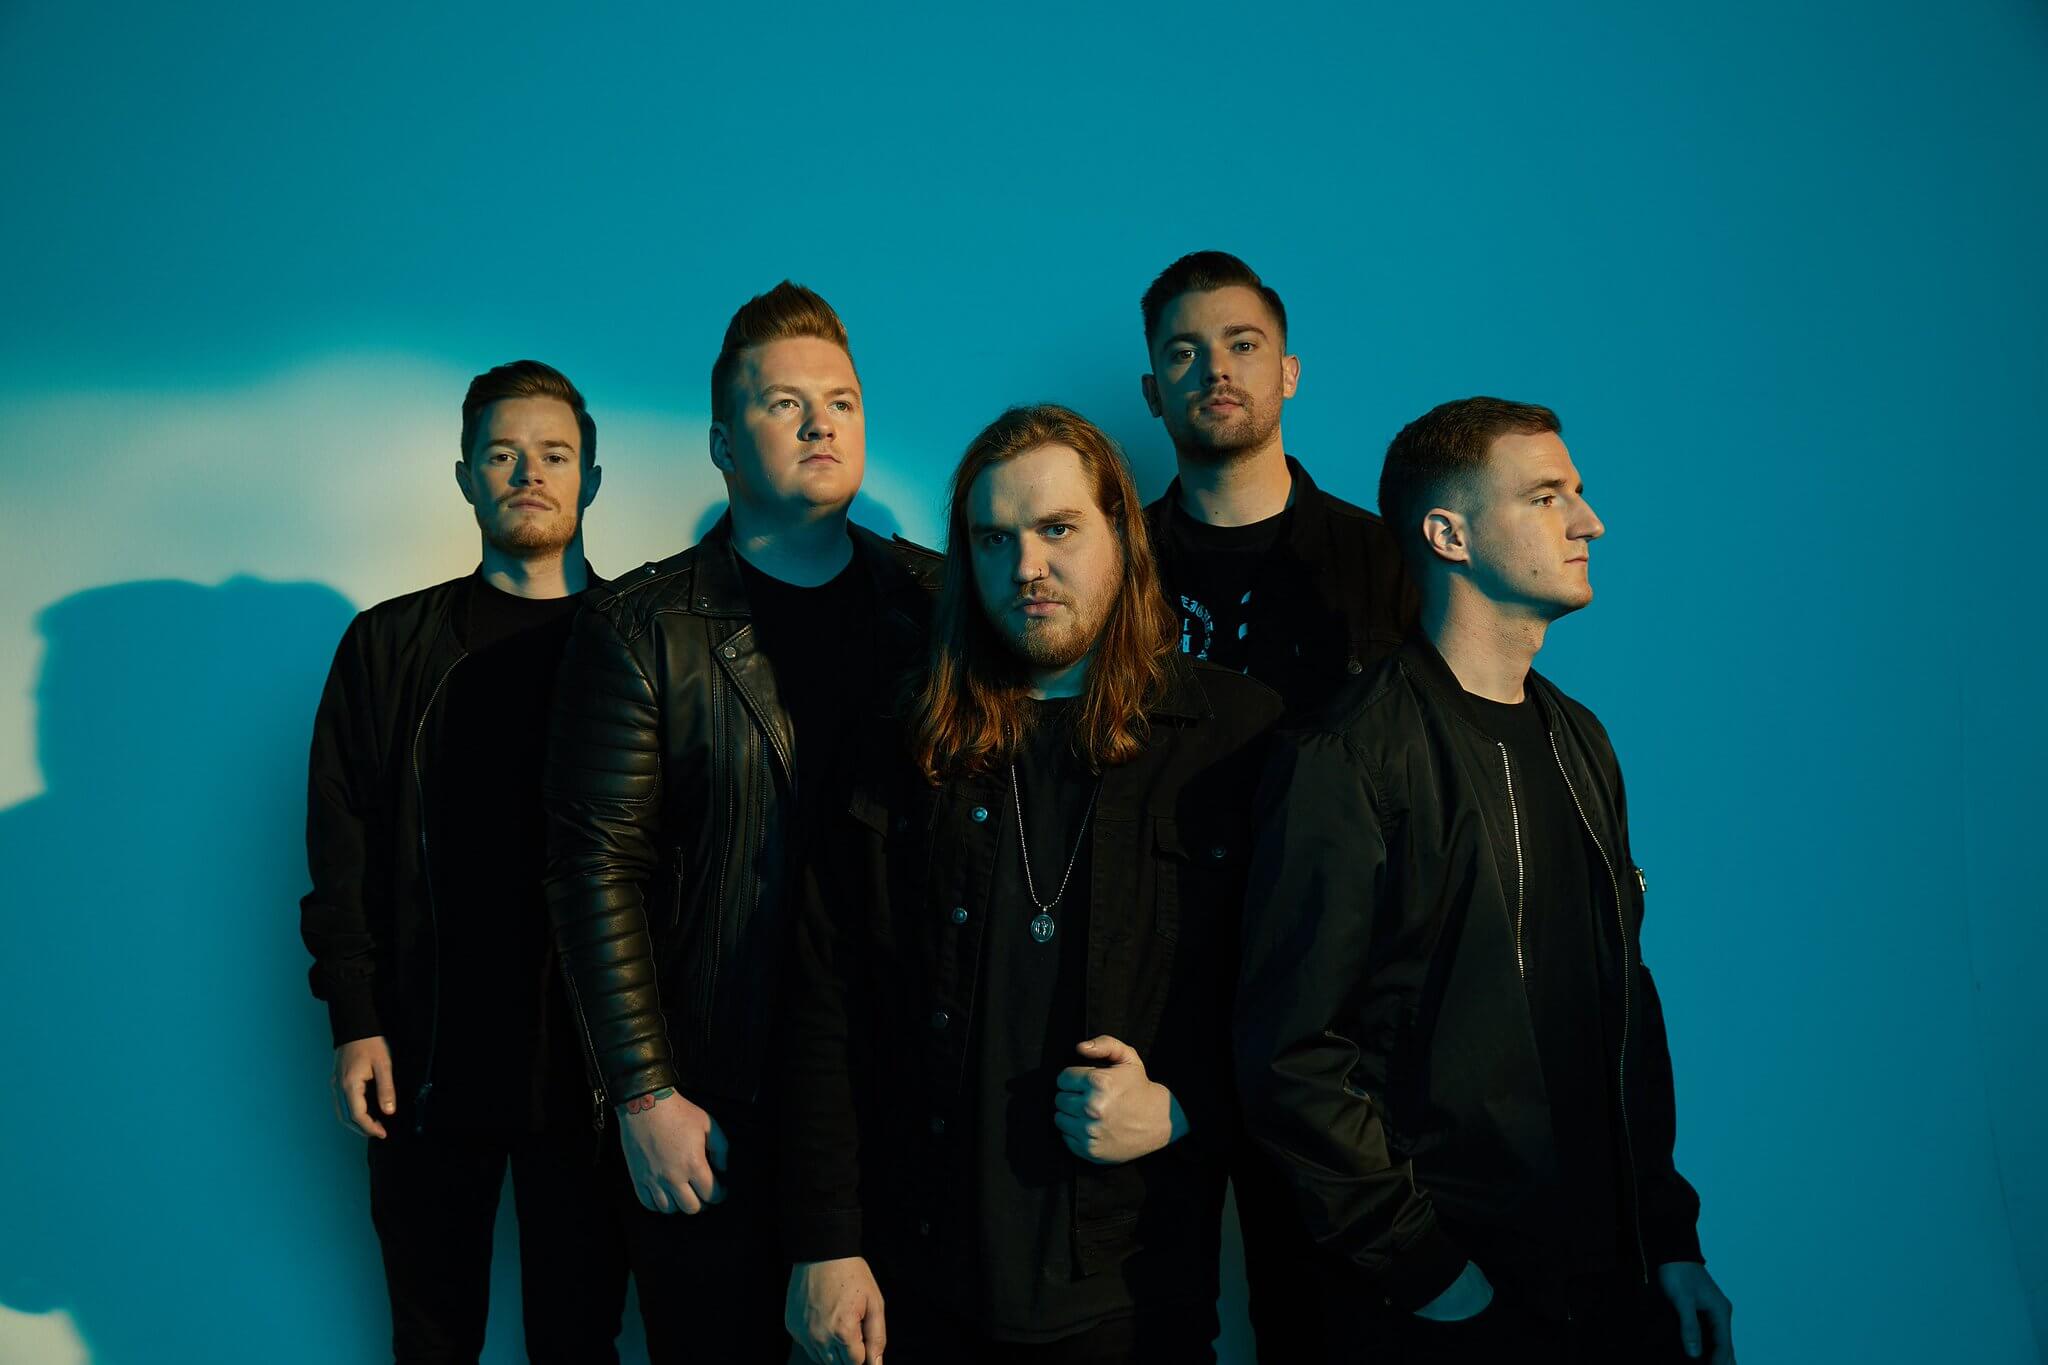 WAGE WAR RELEASE ‘BLUEPRINTS’ B-SIDE TRACK “SURROUNDED”